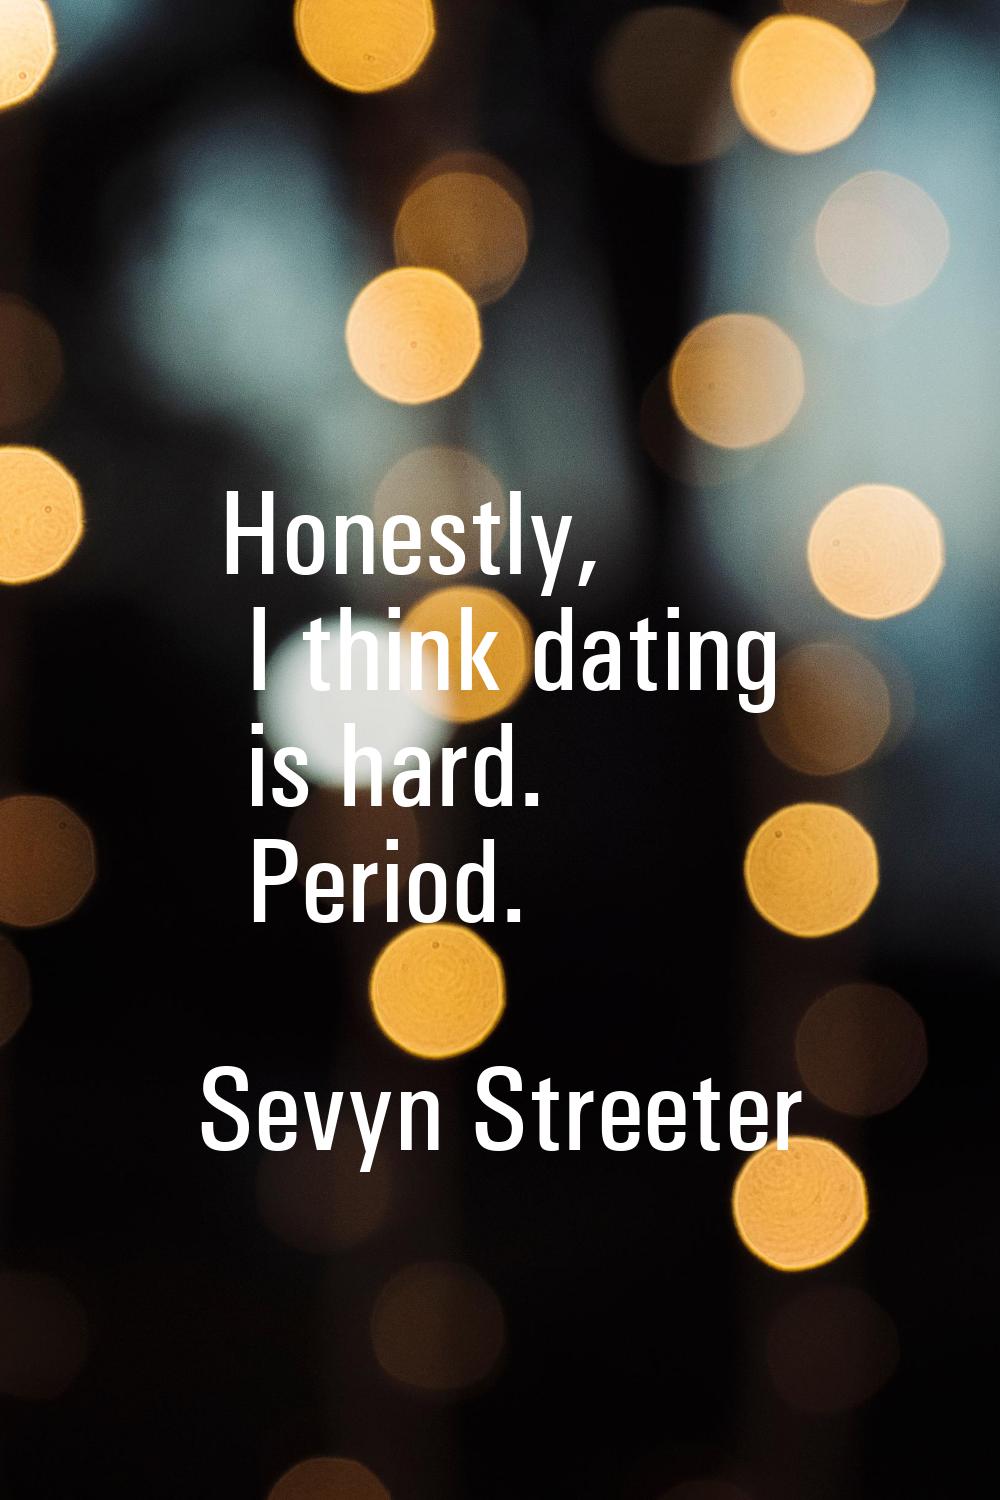 Honestly, I think dating is hard. Period.